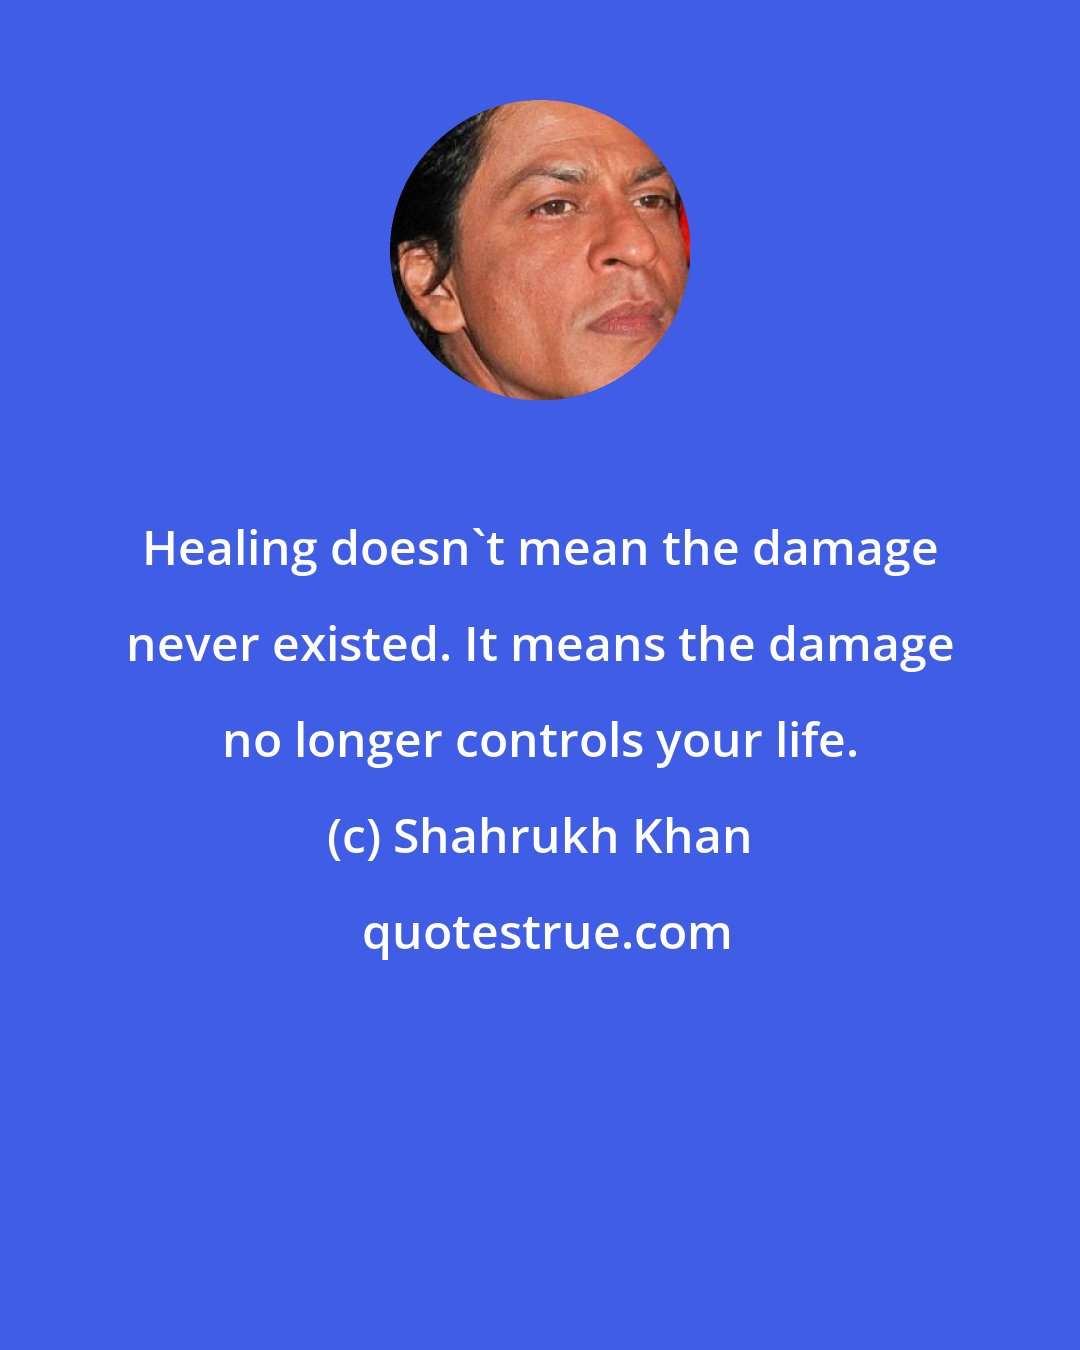 Shahrukh Khan: Healing doesn't mean the damage never existed. It means the damage no longer controls your life.